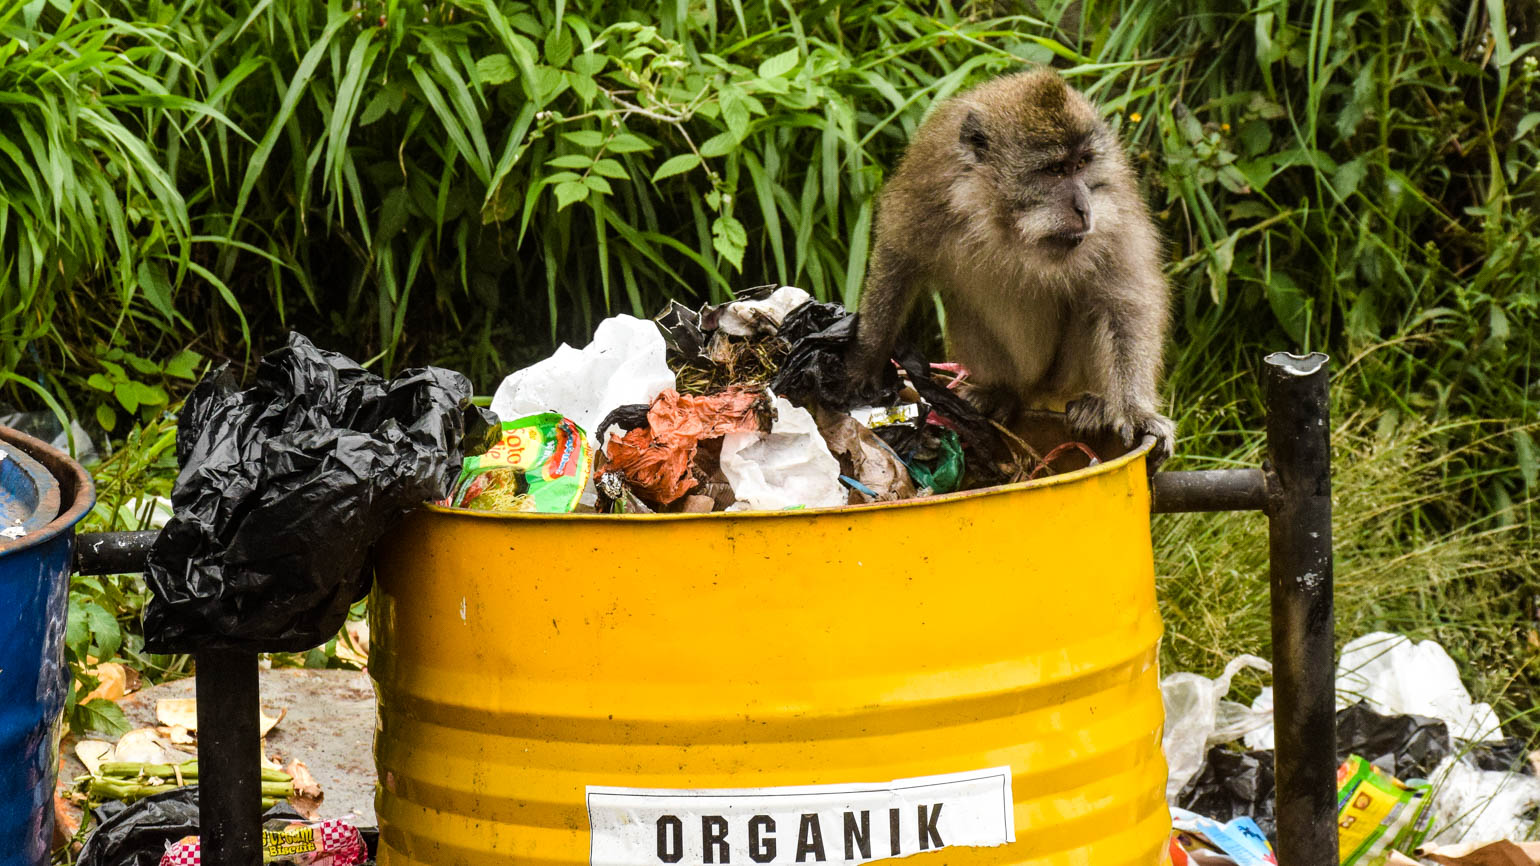 Deforestation Rain Forest - Monkey searching for food in trash can